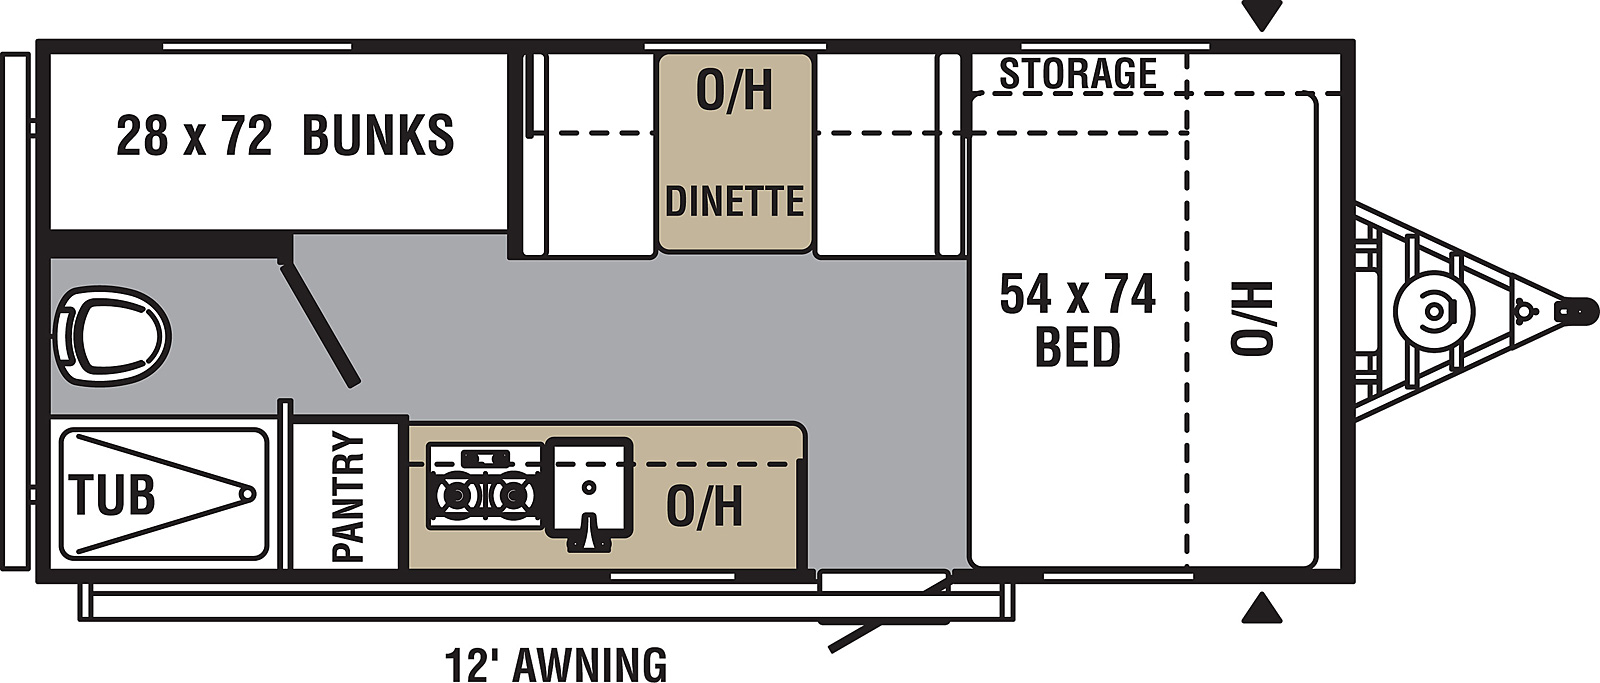 Viking Ultra-Lite 17BH floorplan. The 17BH has no slide outs and one entry door.